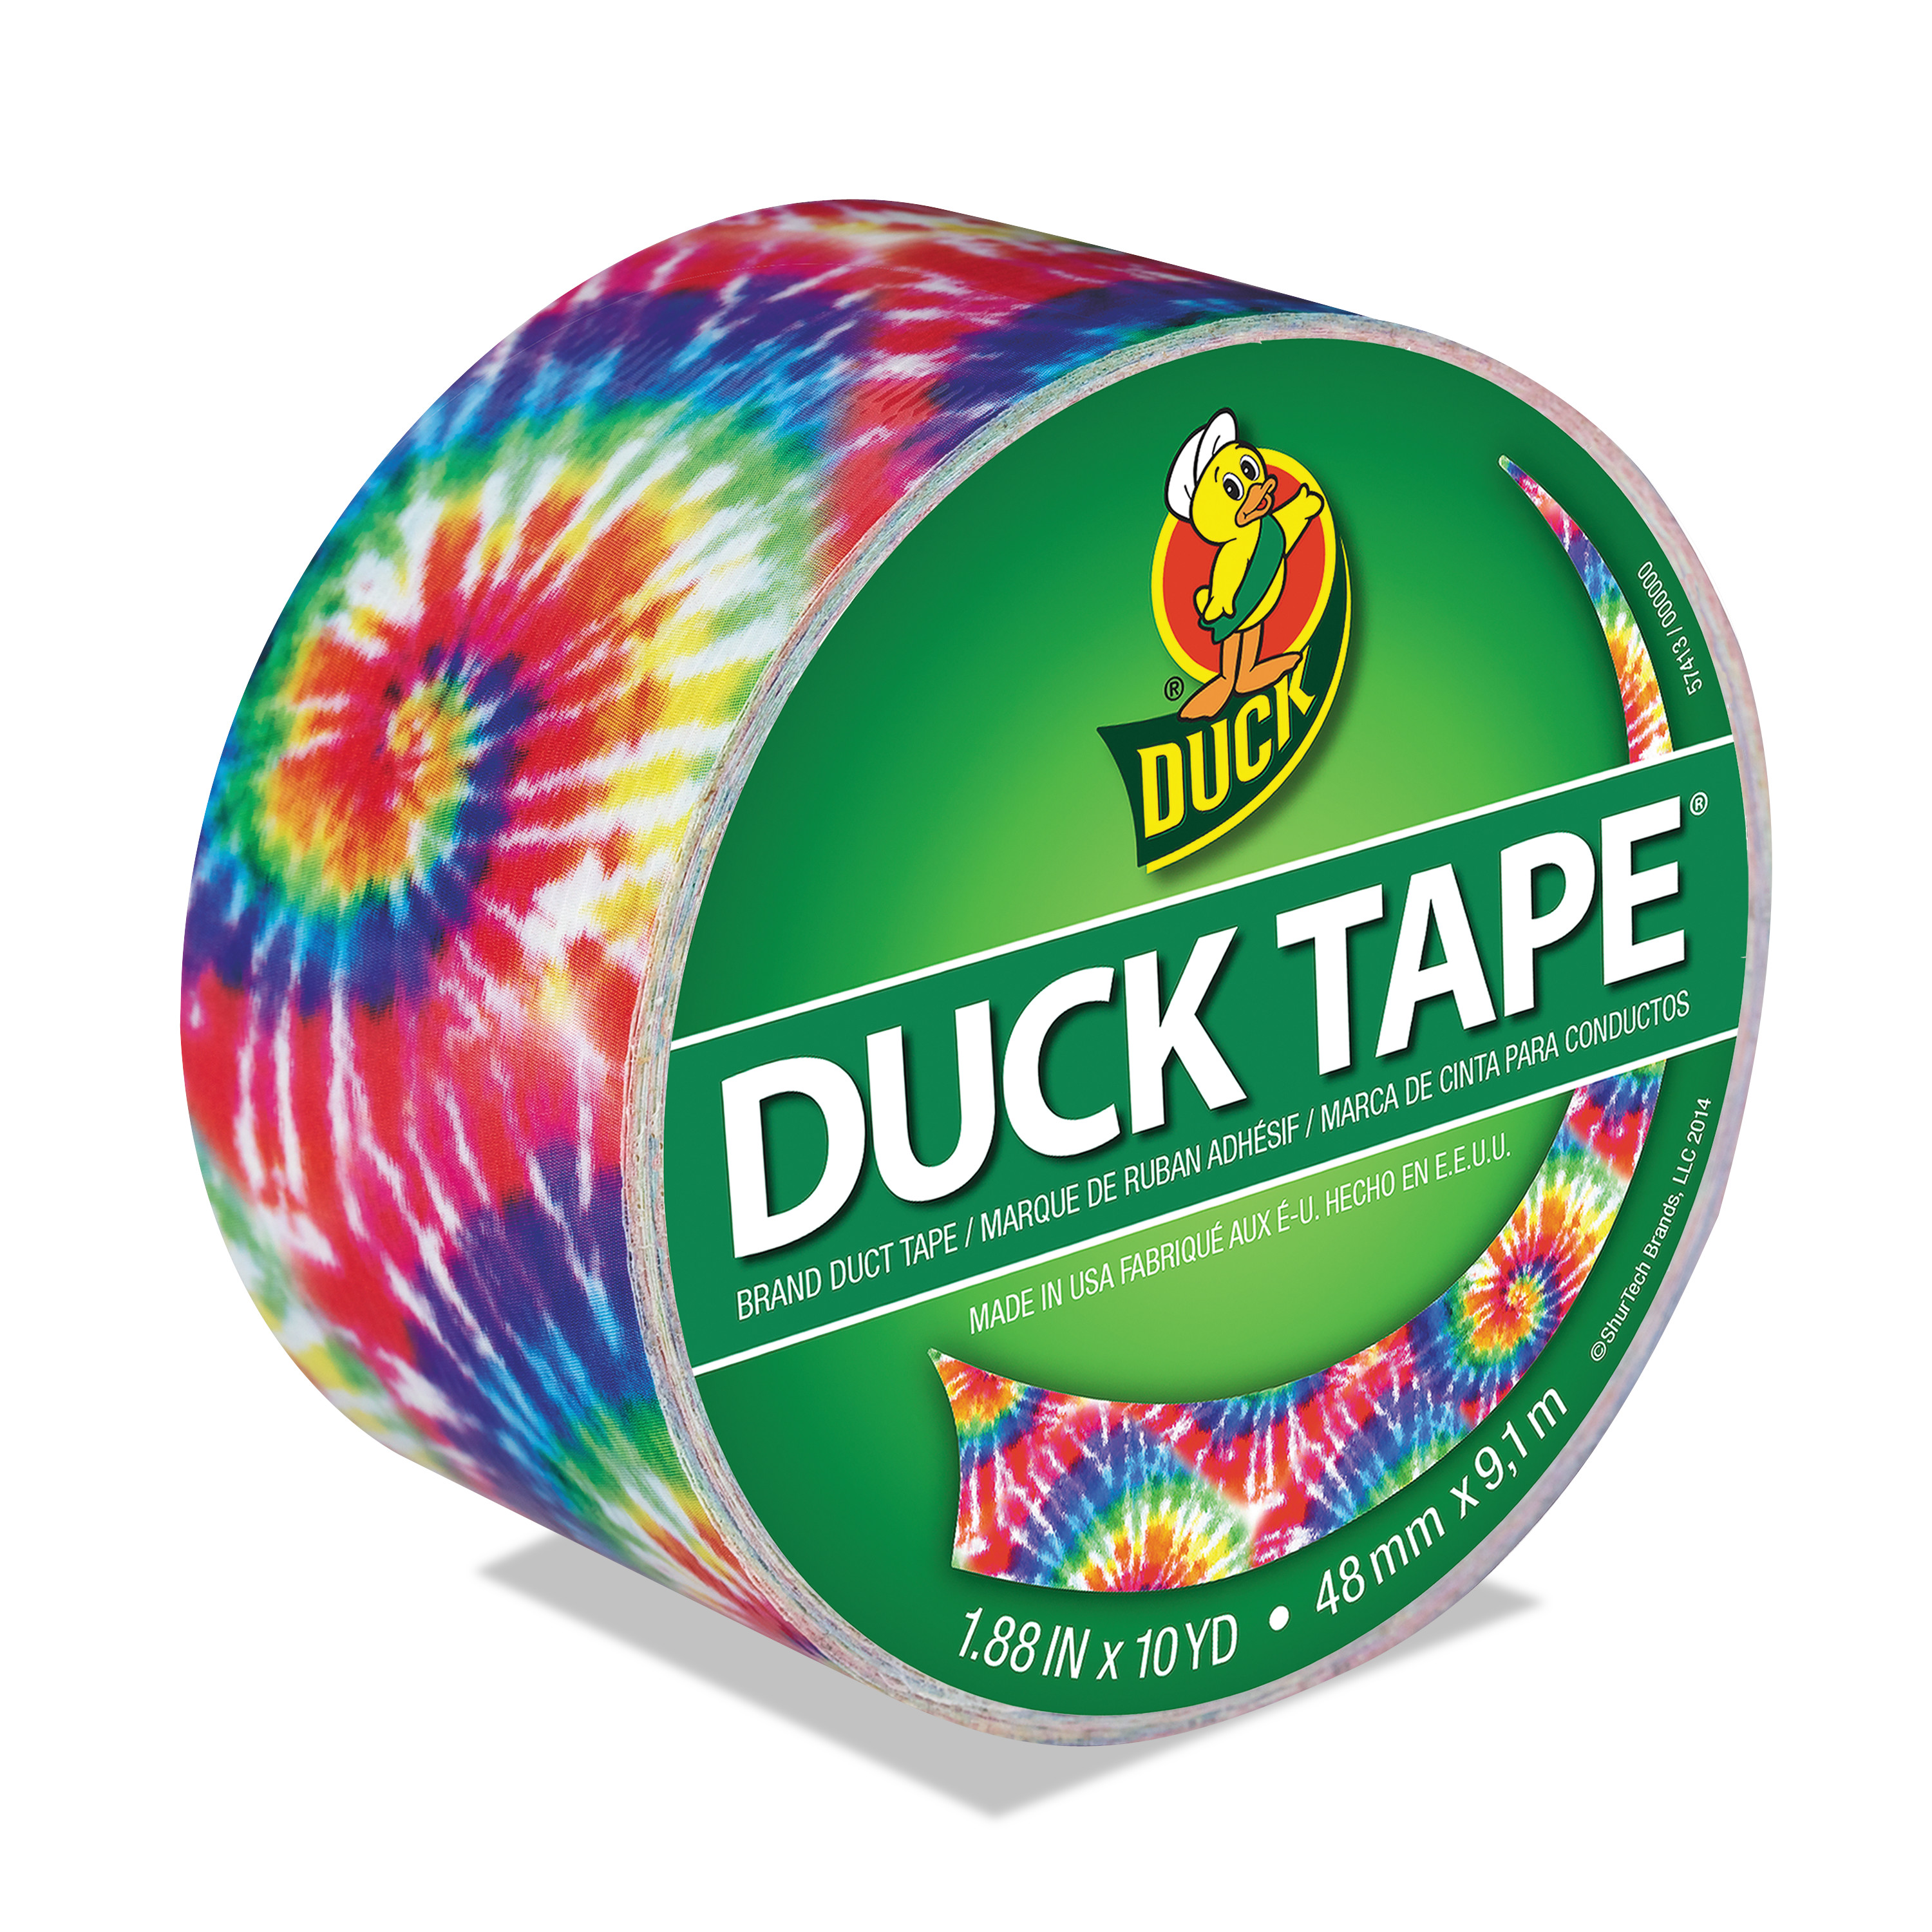 Duck Tape 1.88 In. x 20 Yd. Colored Duct Tape, Purple